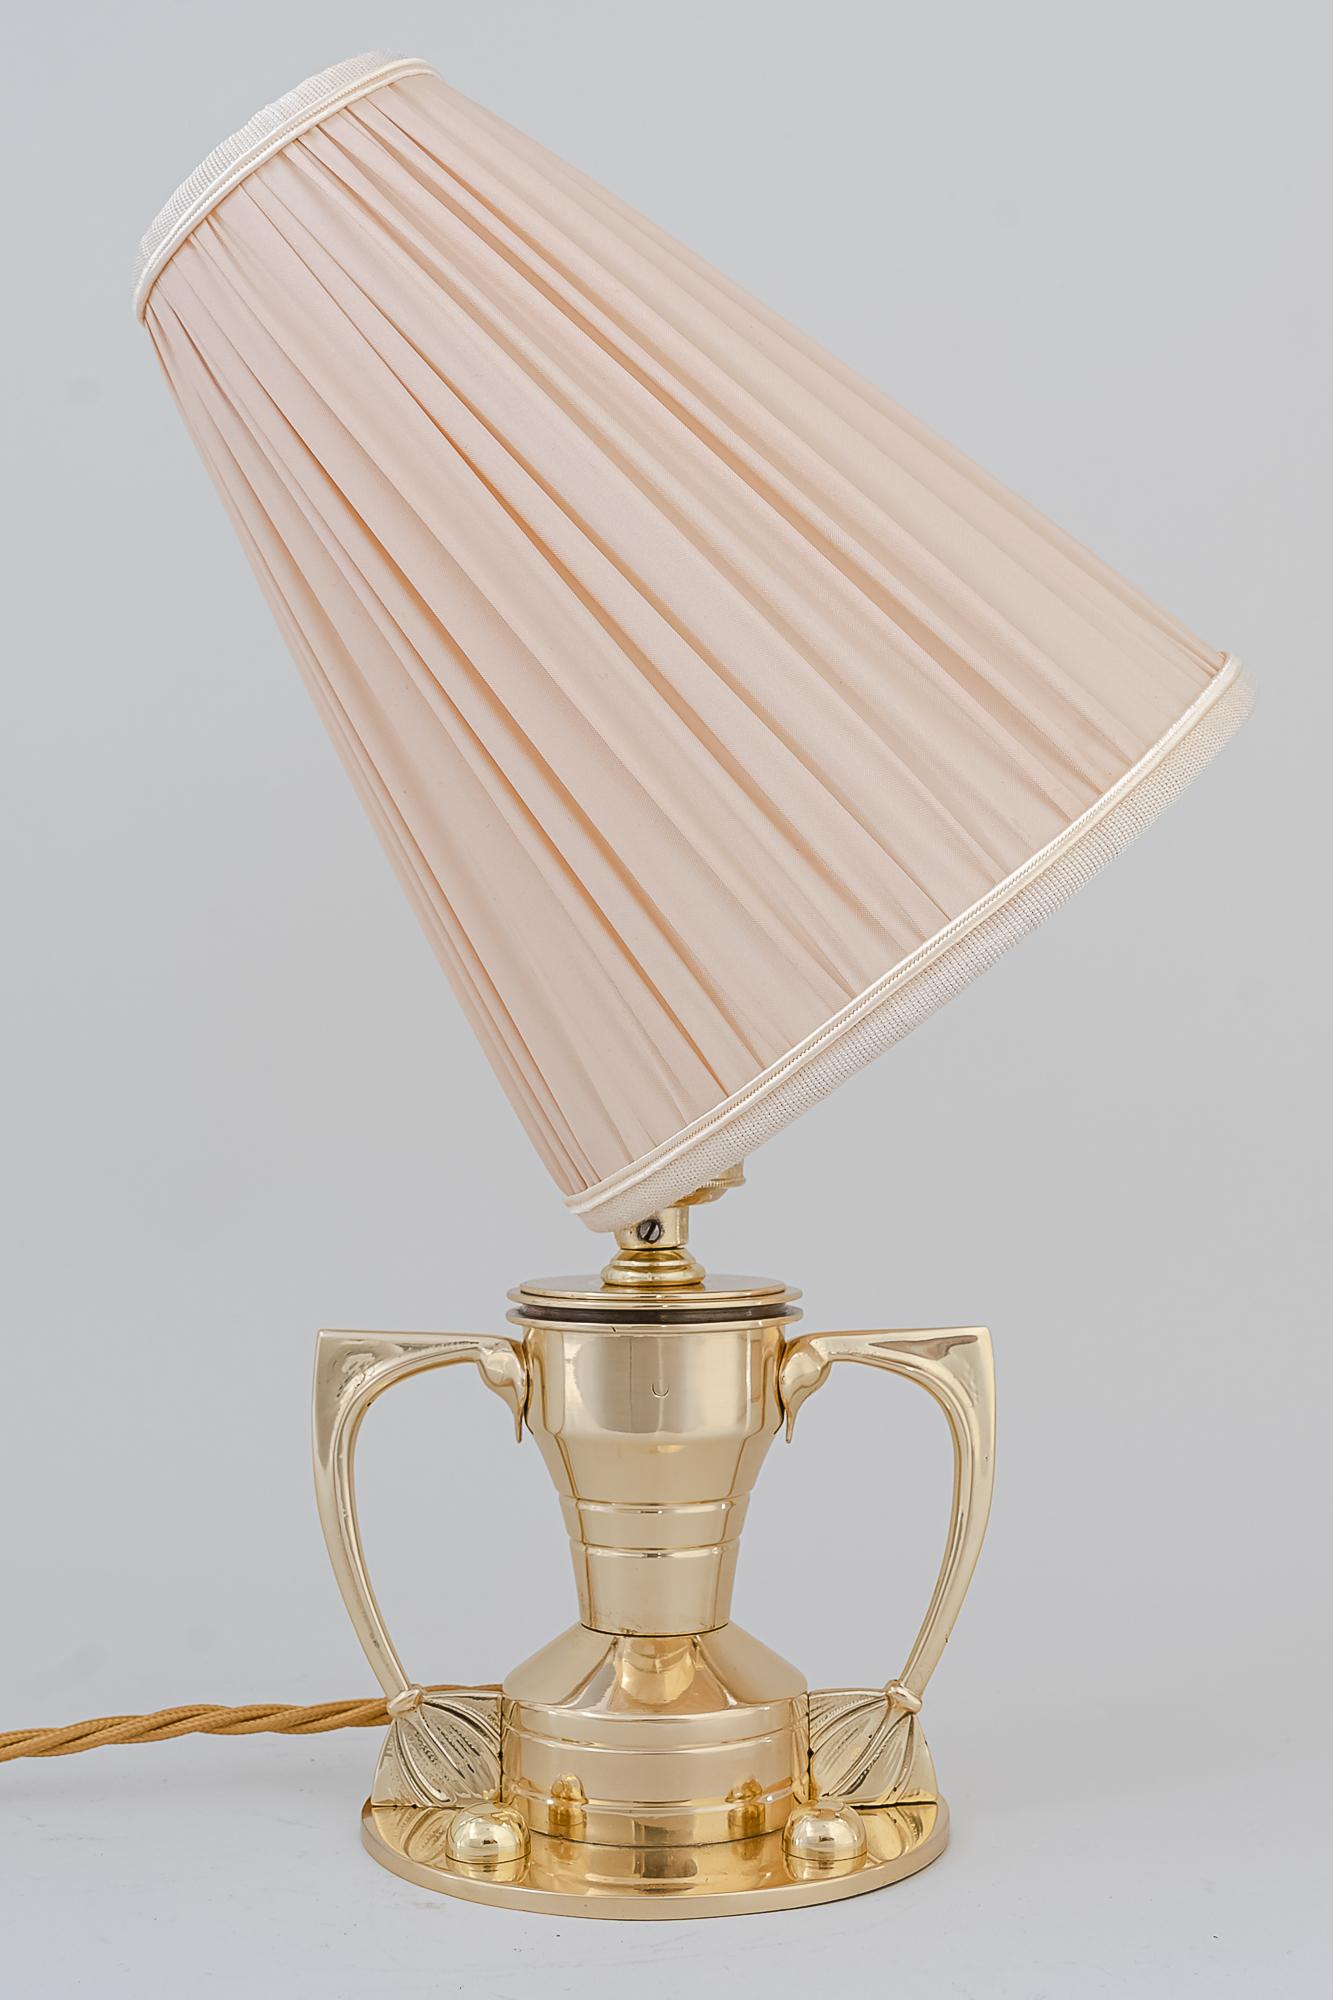 Art Deco table lamp, Vienna, 1920s
Polished and stove enameled
The shade is replaced (new).